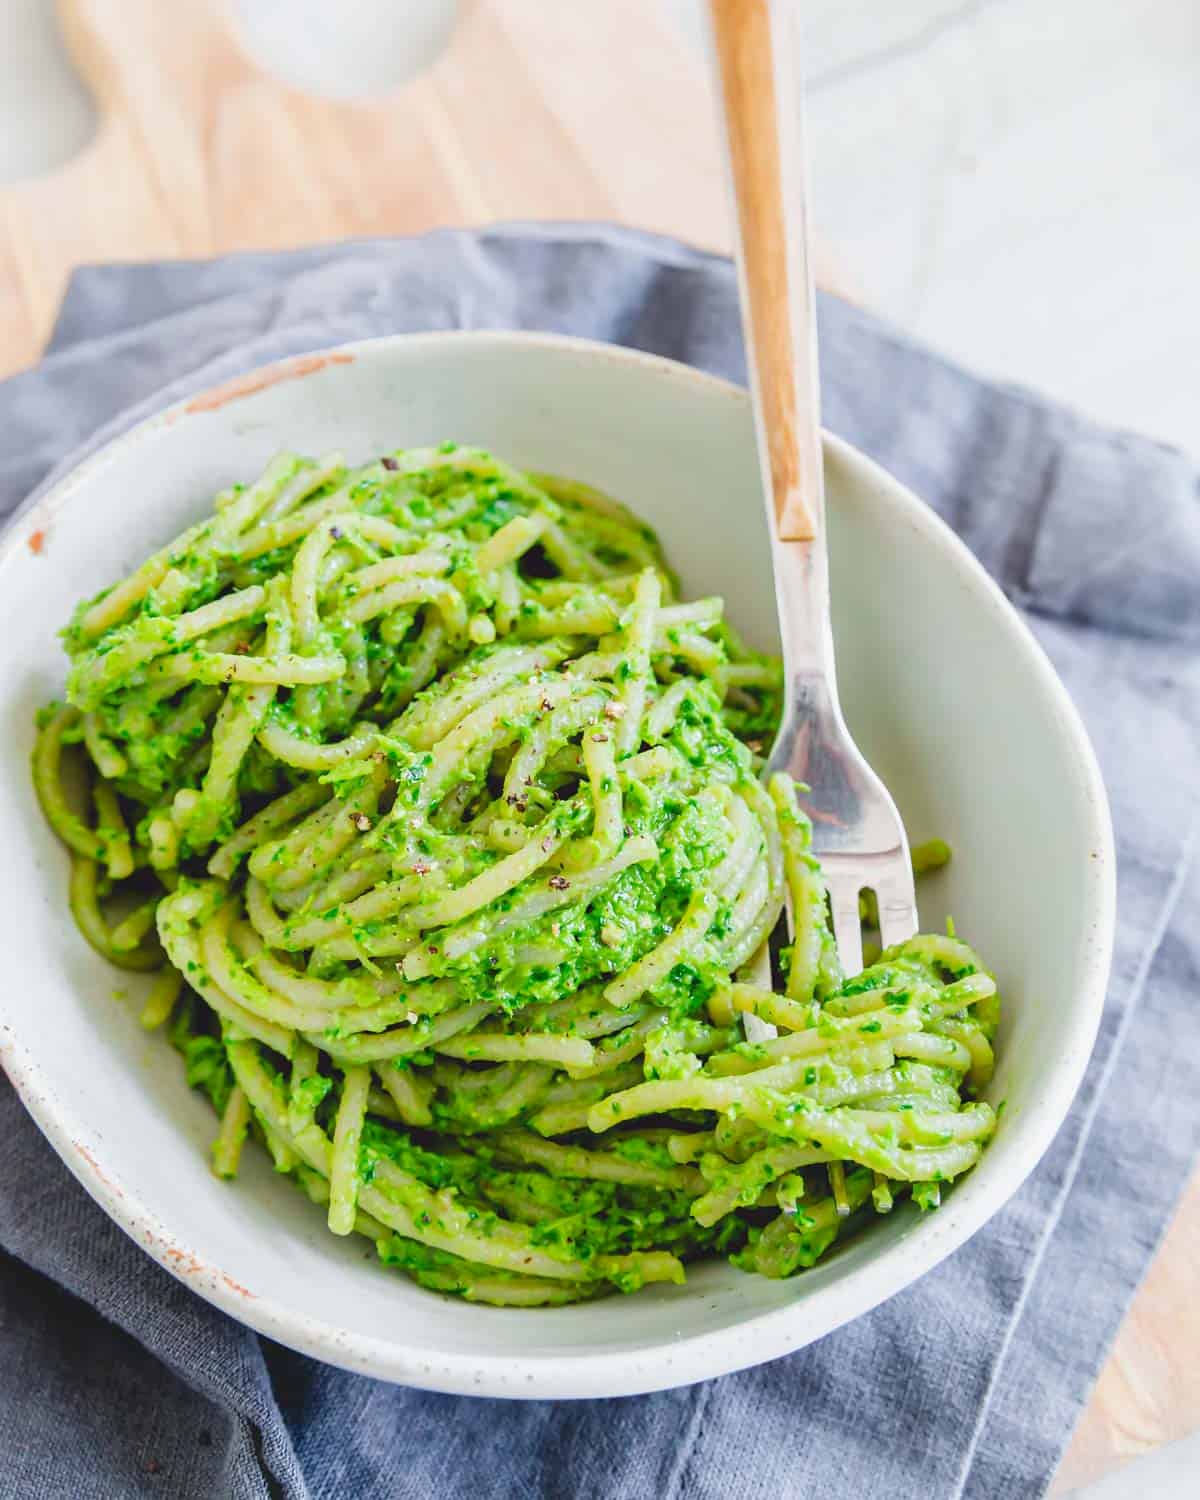 Ramp pesto on spaghetti in a bowl with a fork.